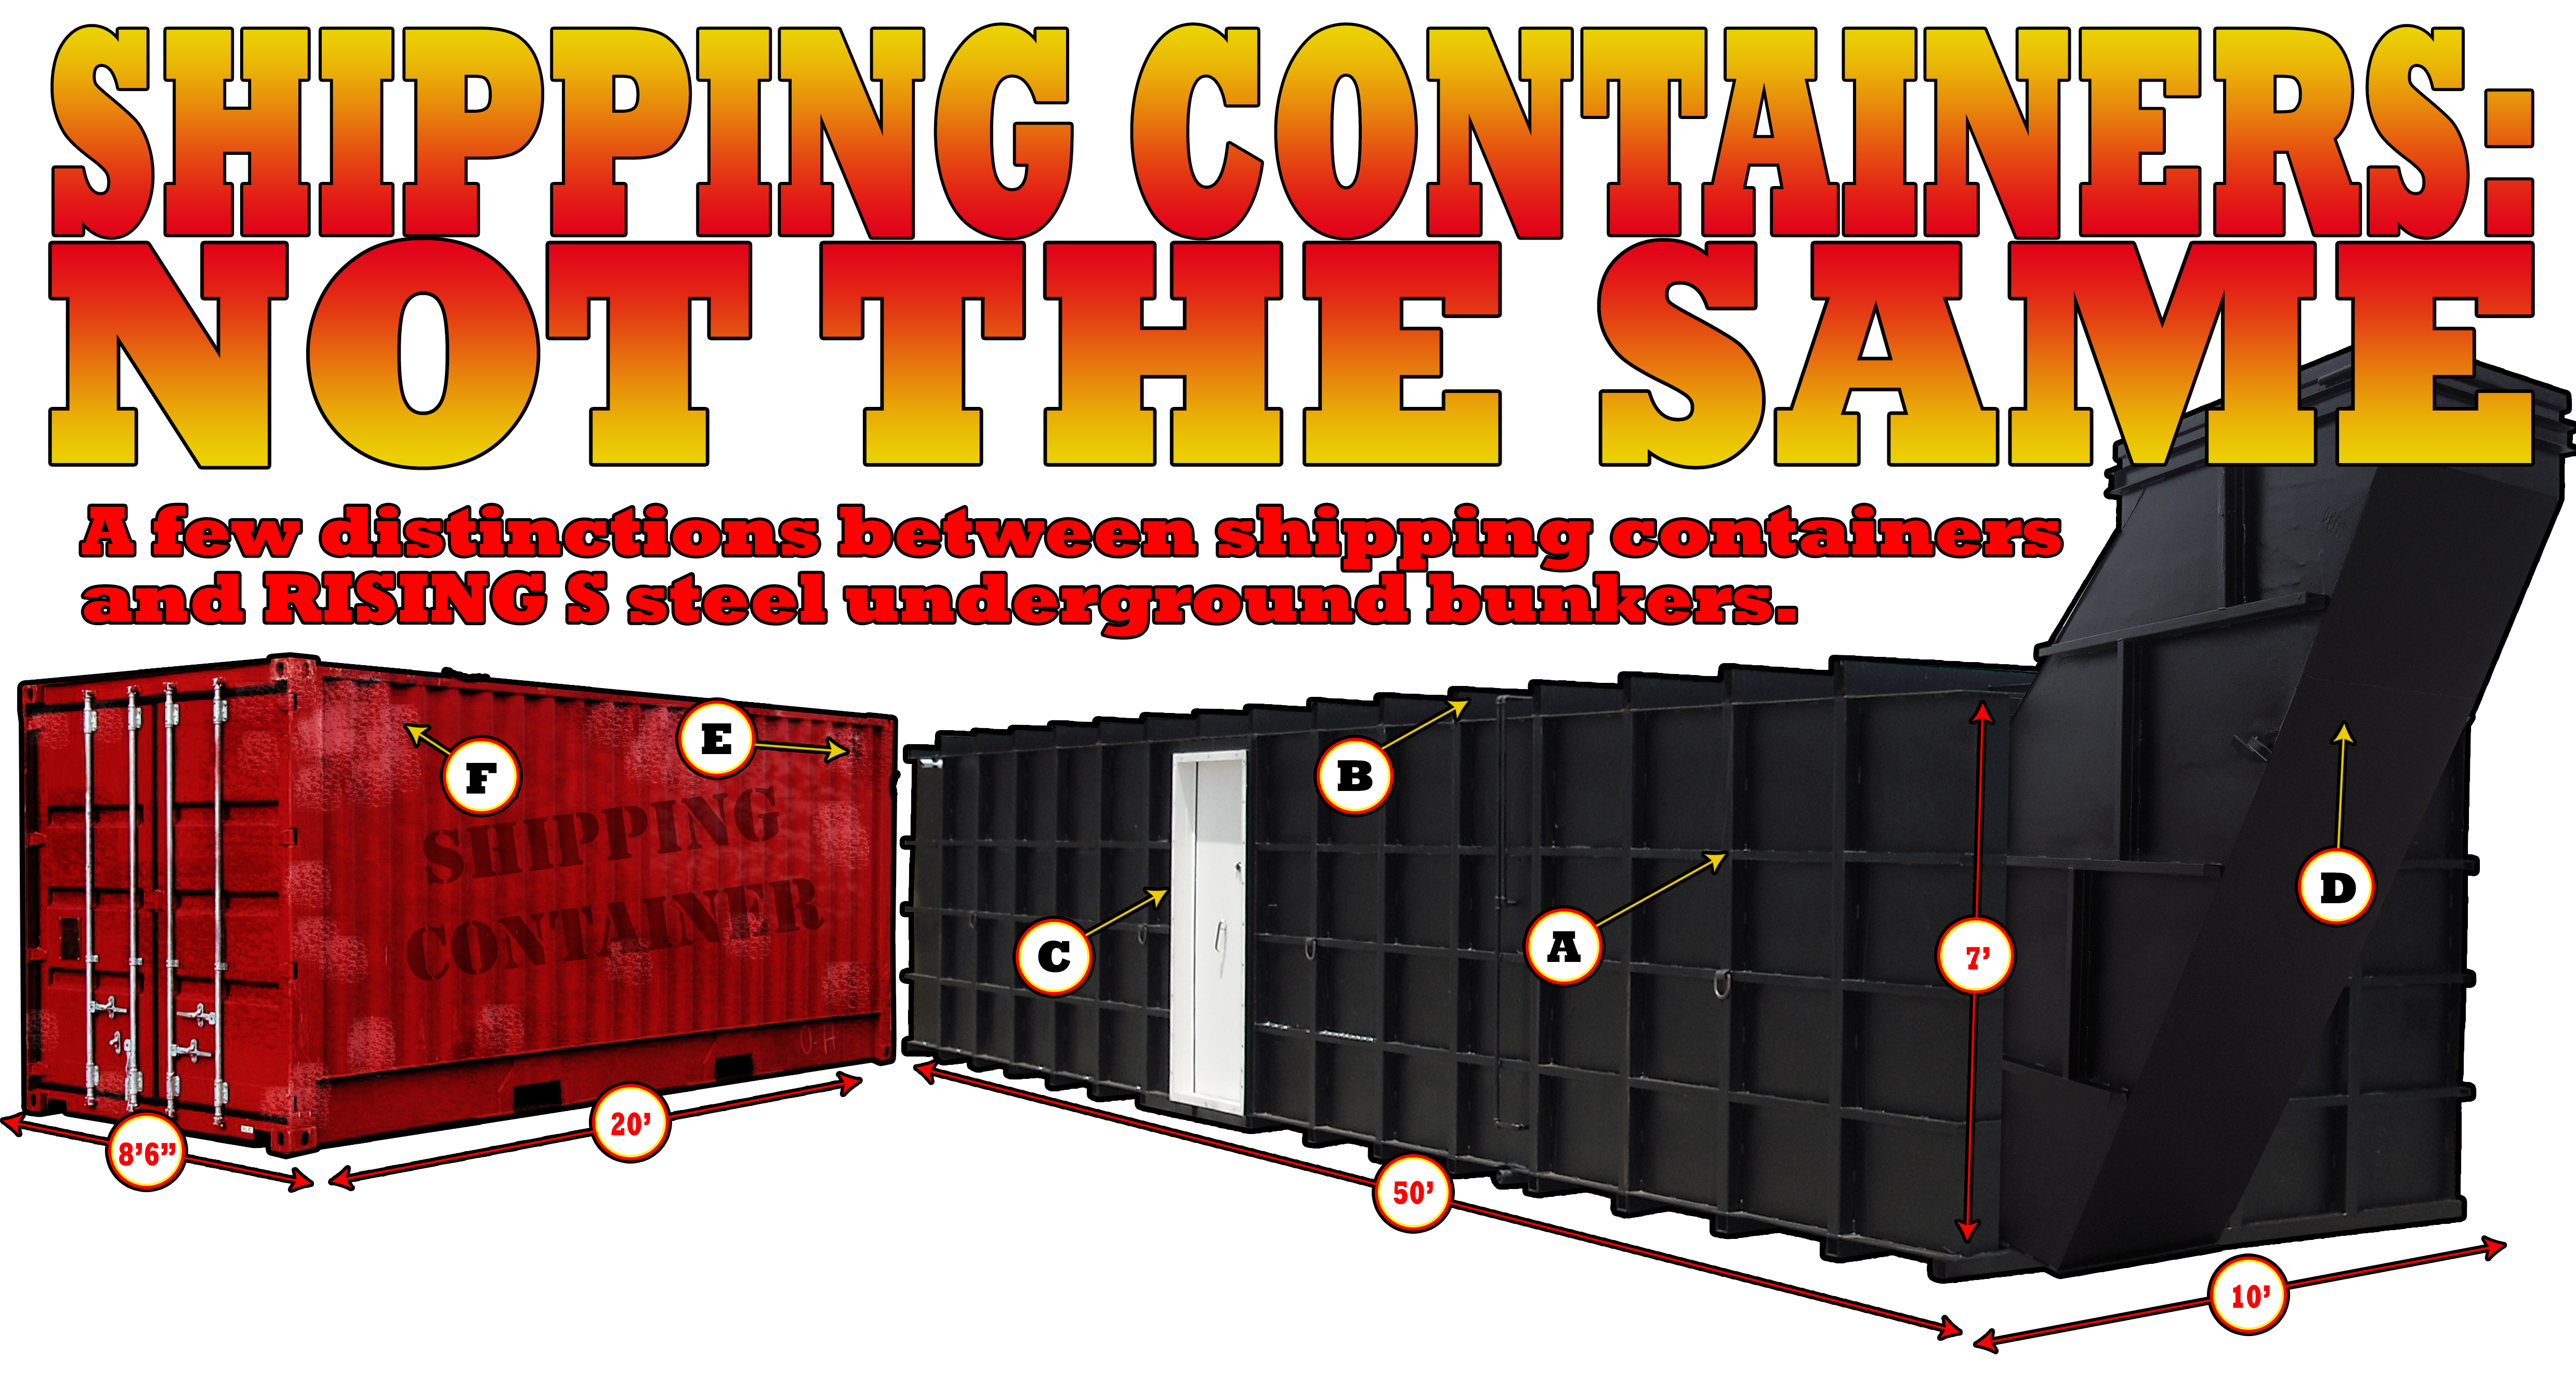 Shipping Containers Make Terrible Shelters - Rising S Bunkers